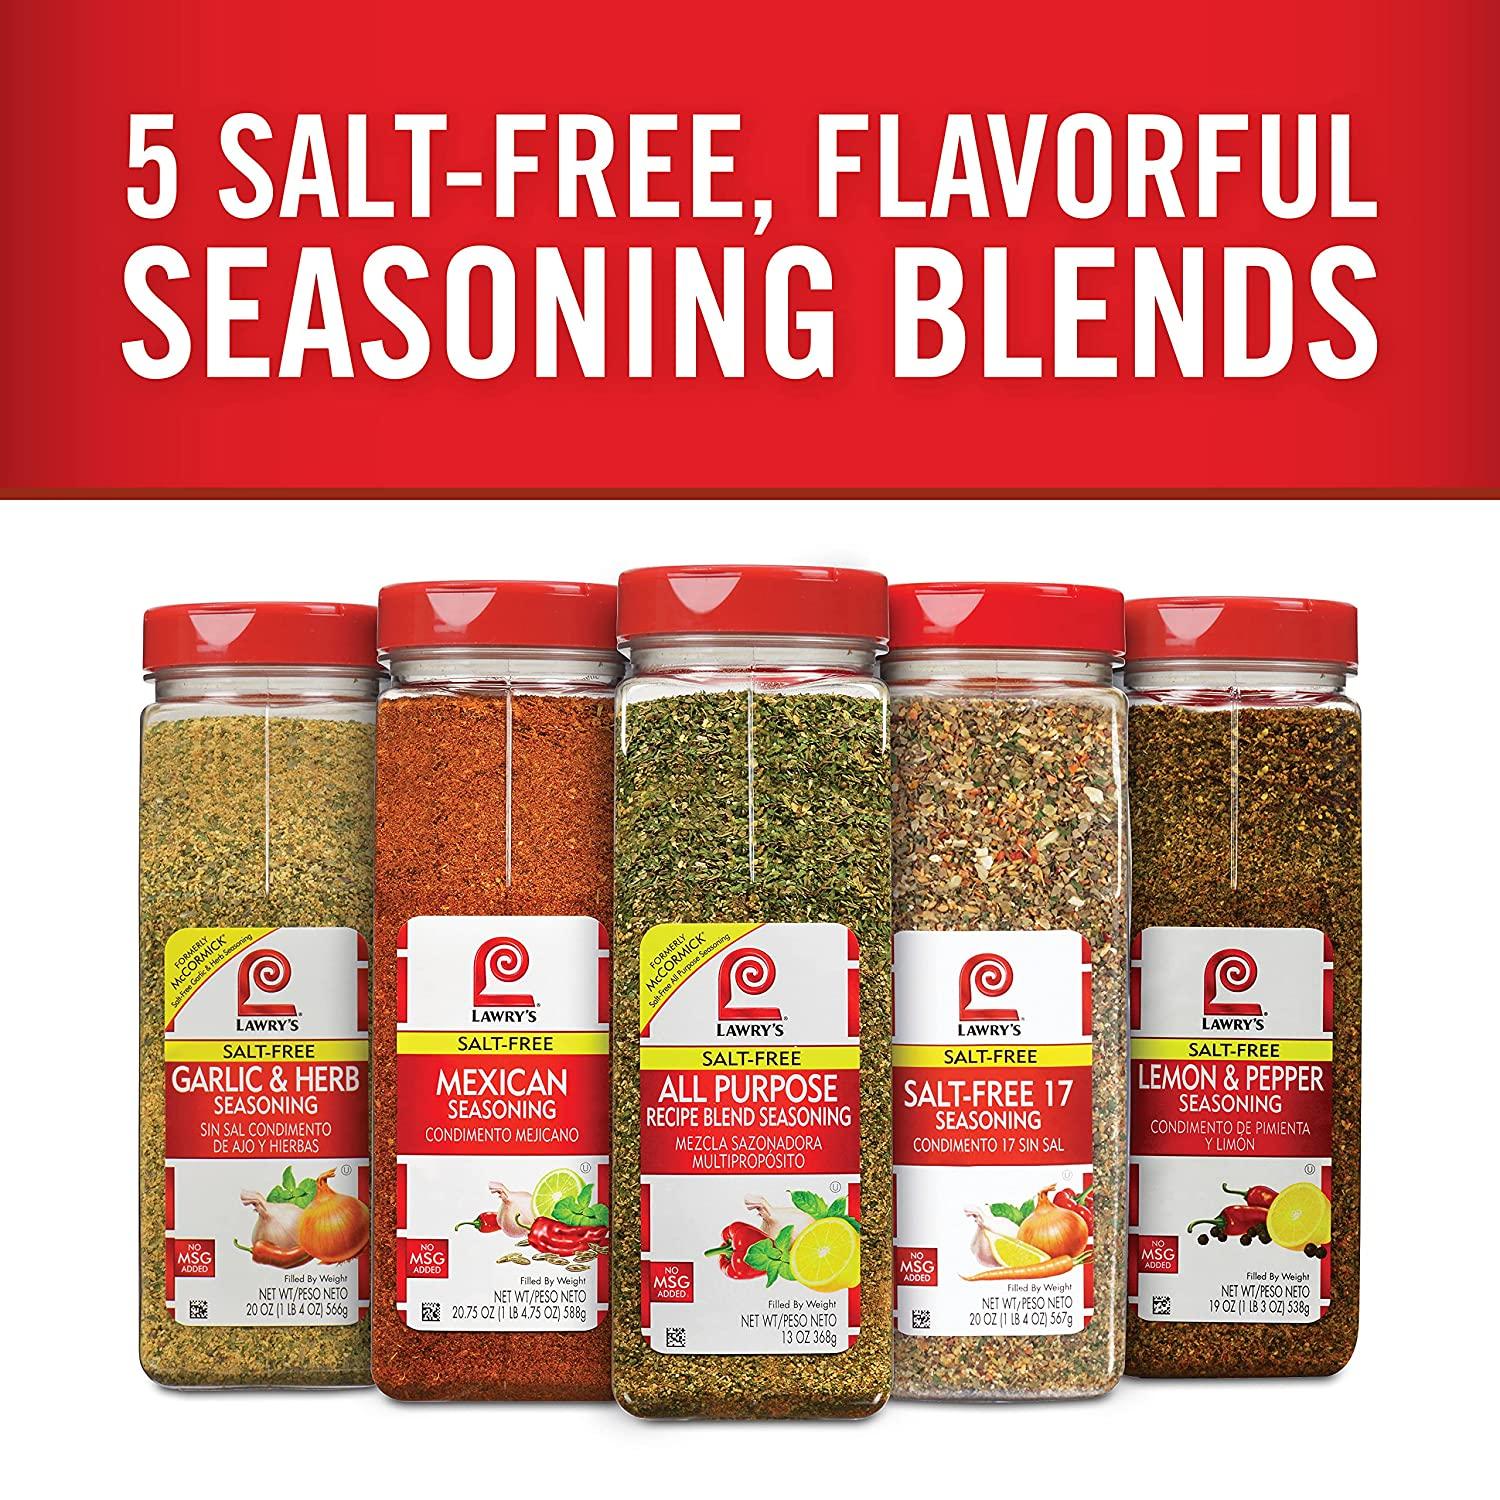 Lawry's Salt Free 17 Seasoning, 10 oz - One 10 Ounce Container of